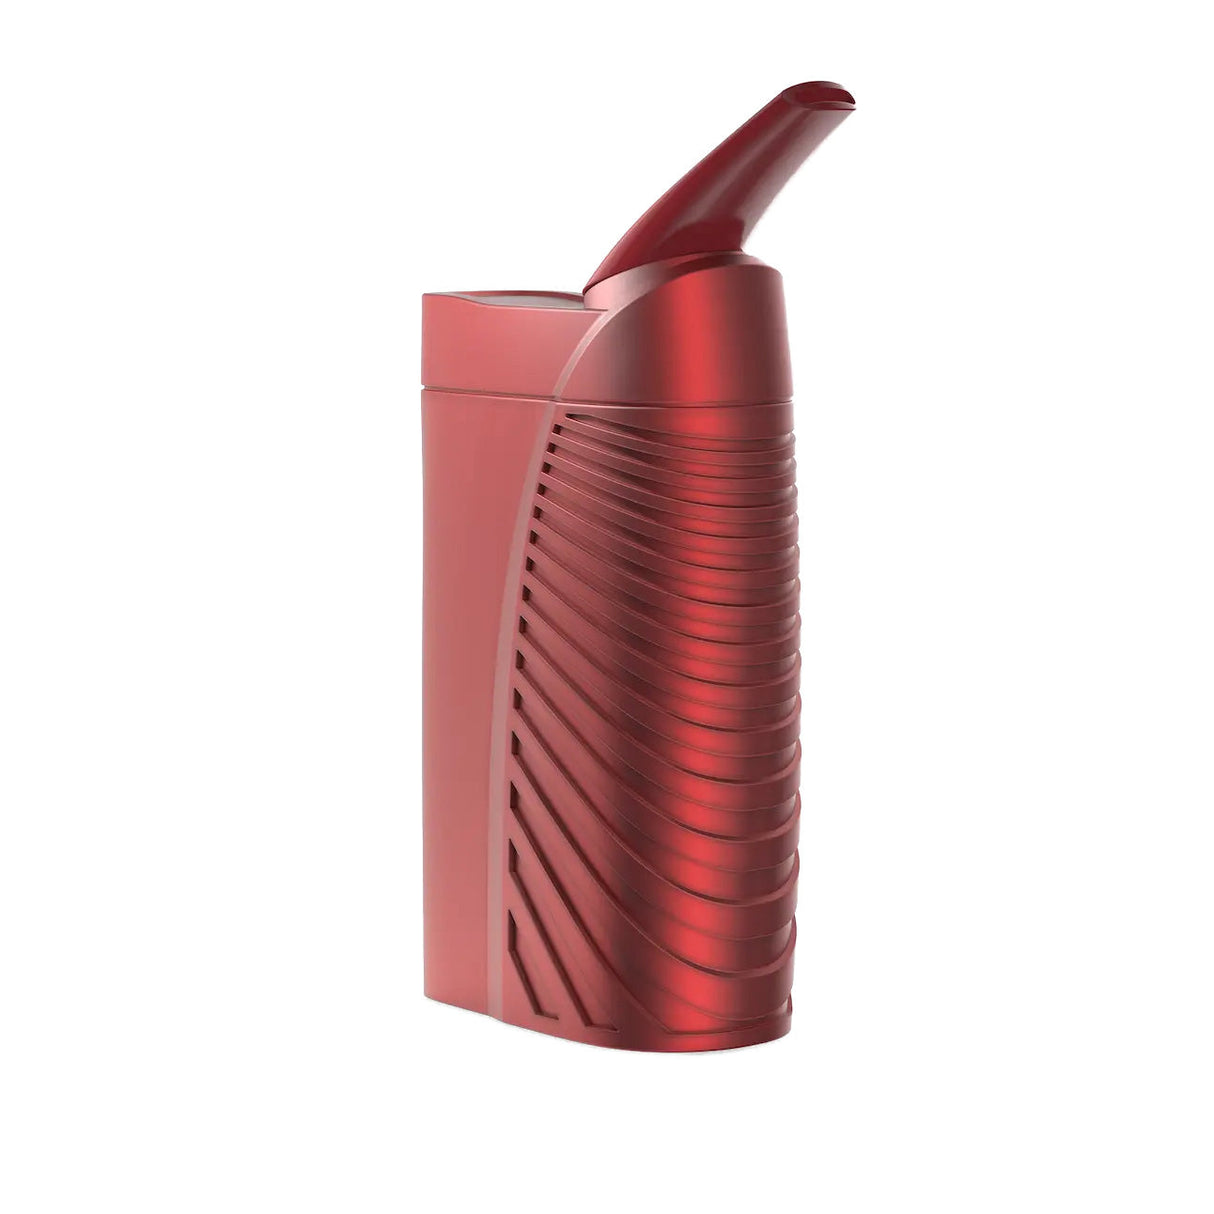 Boundless CFV Vaporizer in Red - Portable Ceramic Vaporizer - Side View